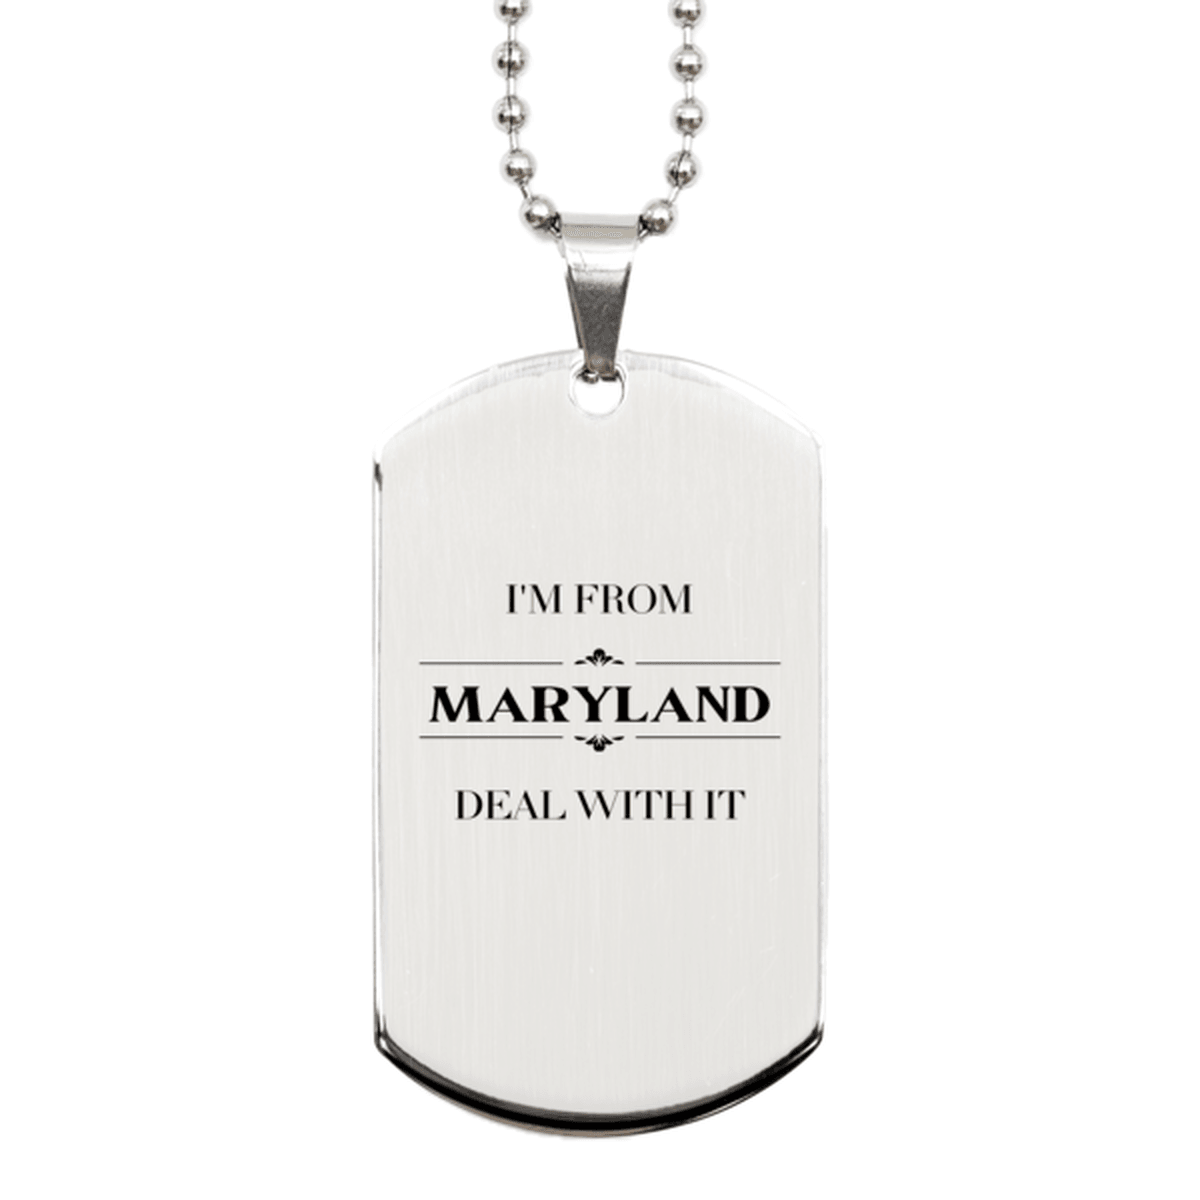 I'm from Maryland, Deal with it, Proud Maryland State Gifts, Maryland Silver Dog Tag Gift Idea, Christmas Gifts for Maryland People, Coworkers, Colleague - Mallard Moon Gift Shop